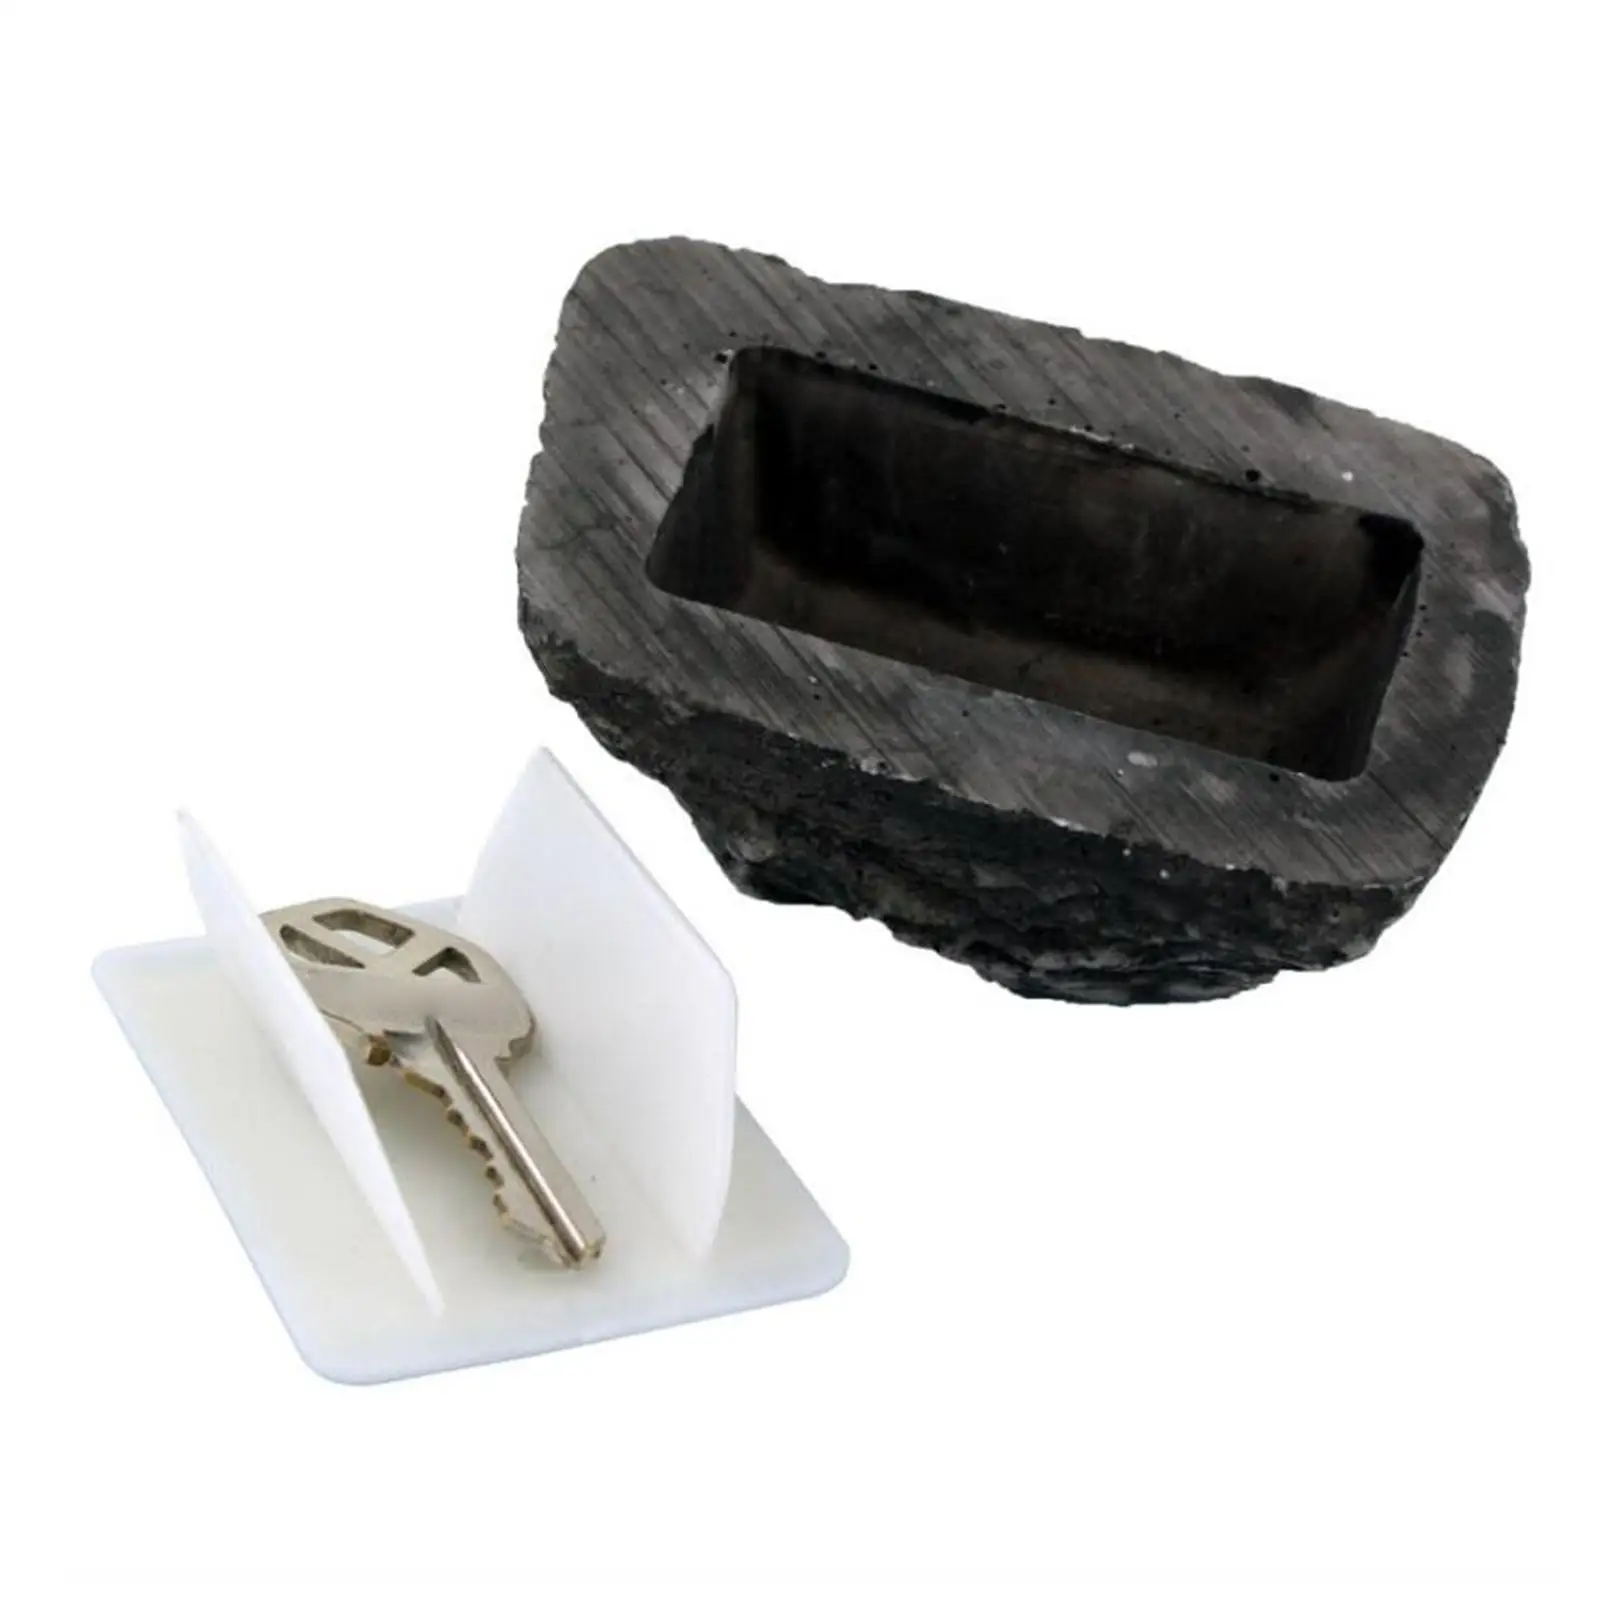 Hide   Rock, Look and Feels Like a Real Rock Safely Hiding Spare Keys or Other Small Objects for Outdoor Garden or Yard